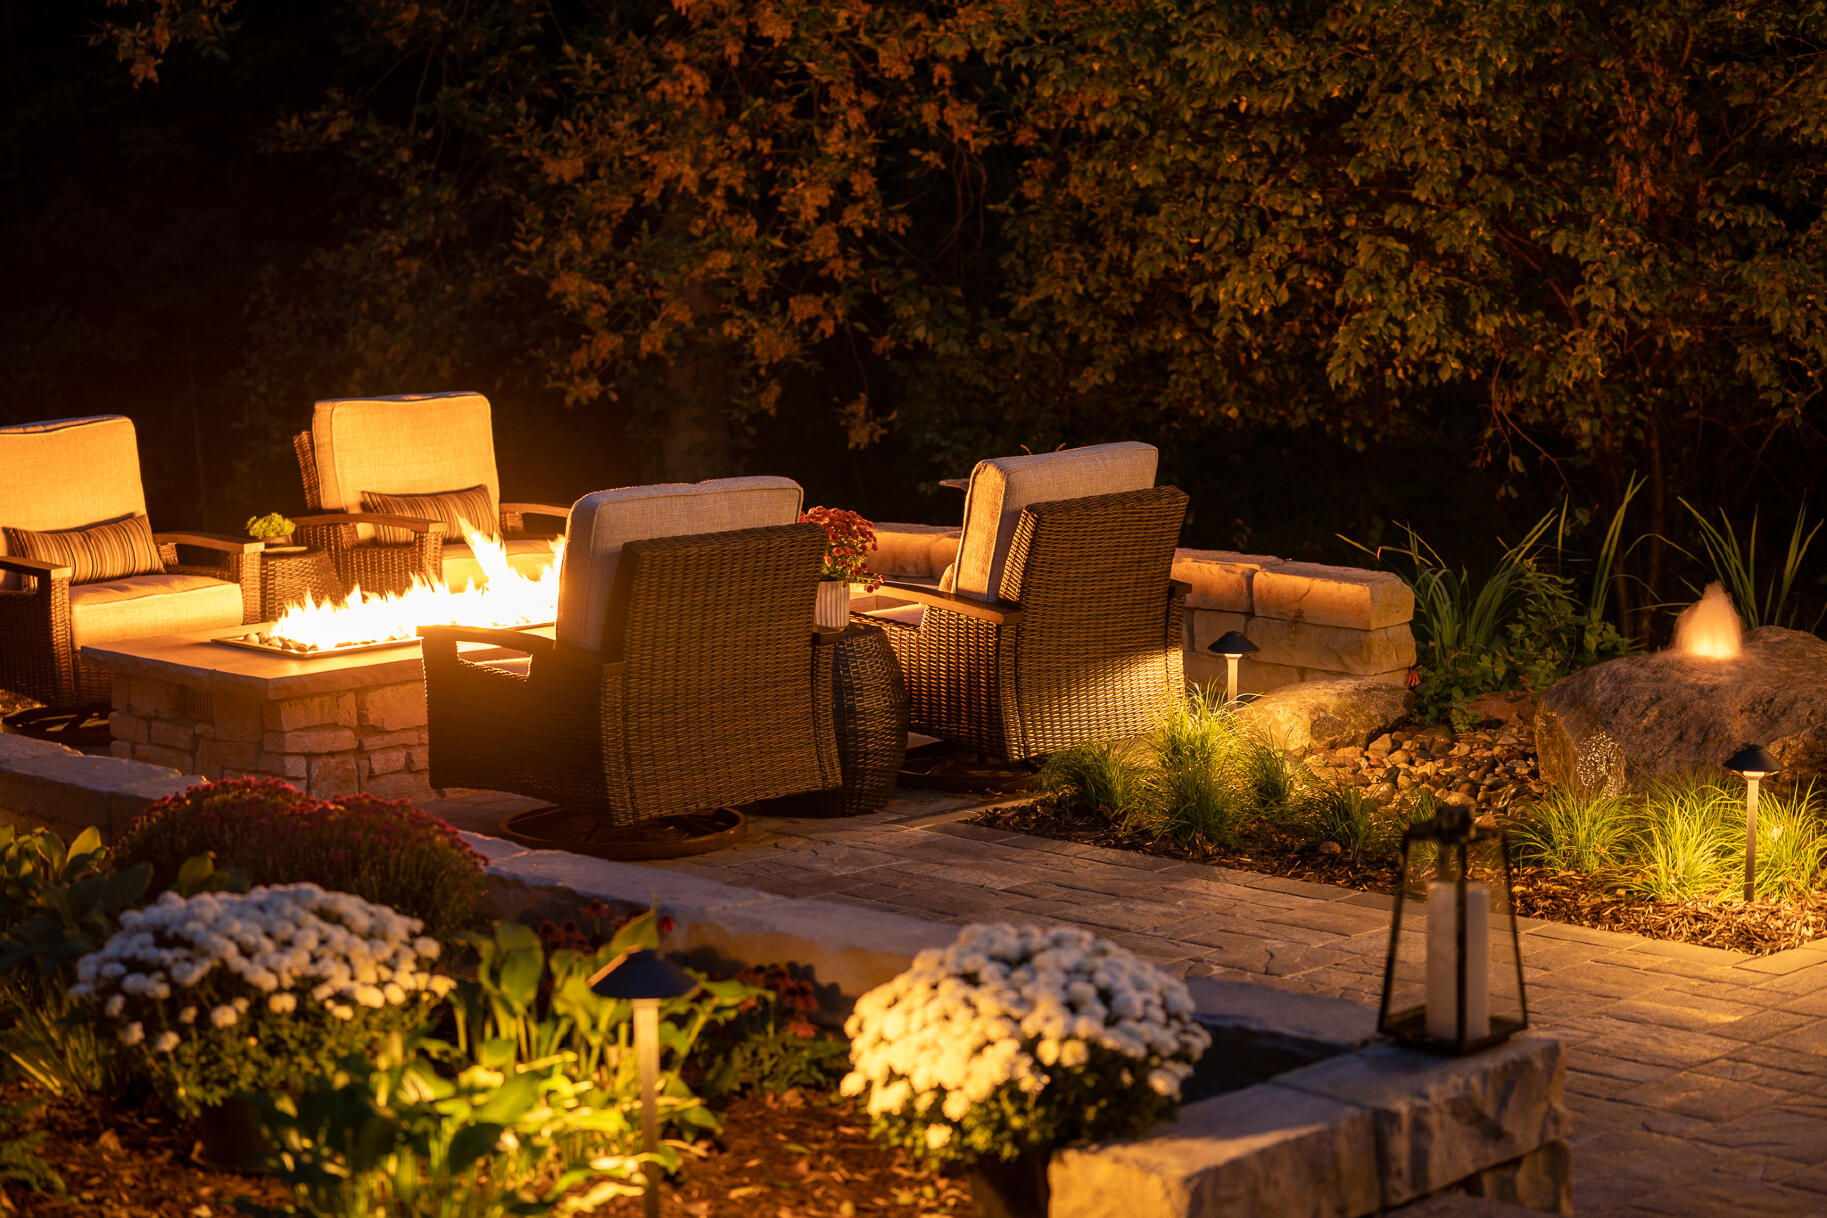 Outdoor patio seating with oblong fireplace for roasting marshmellows